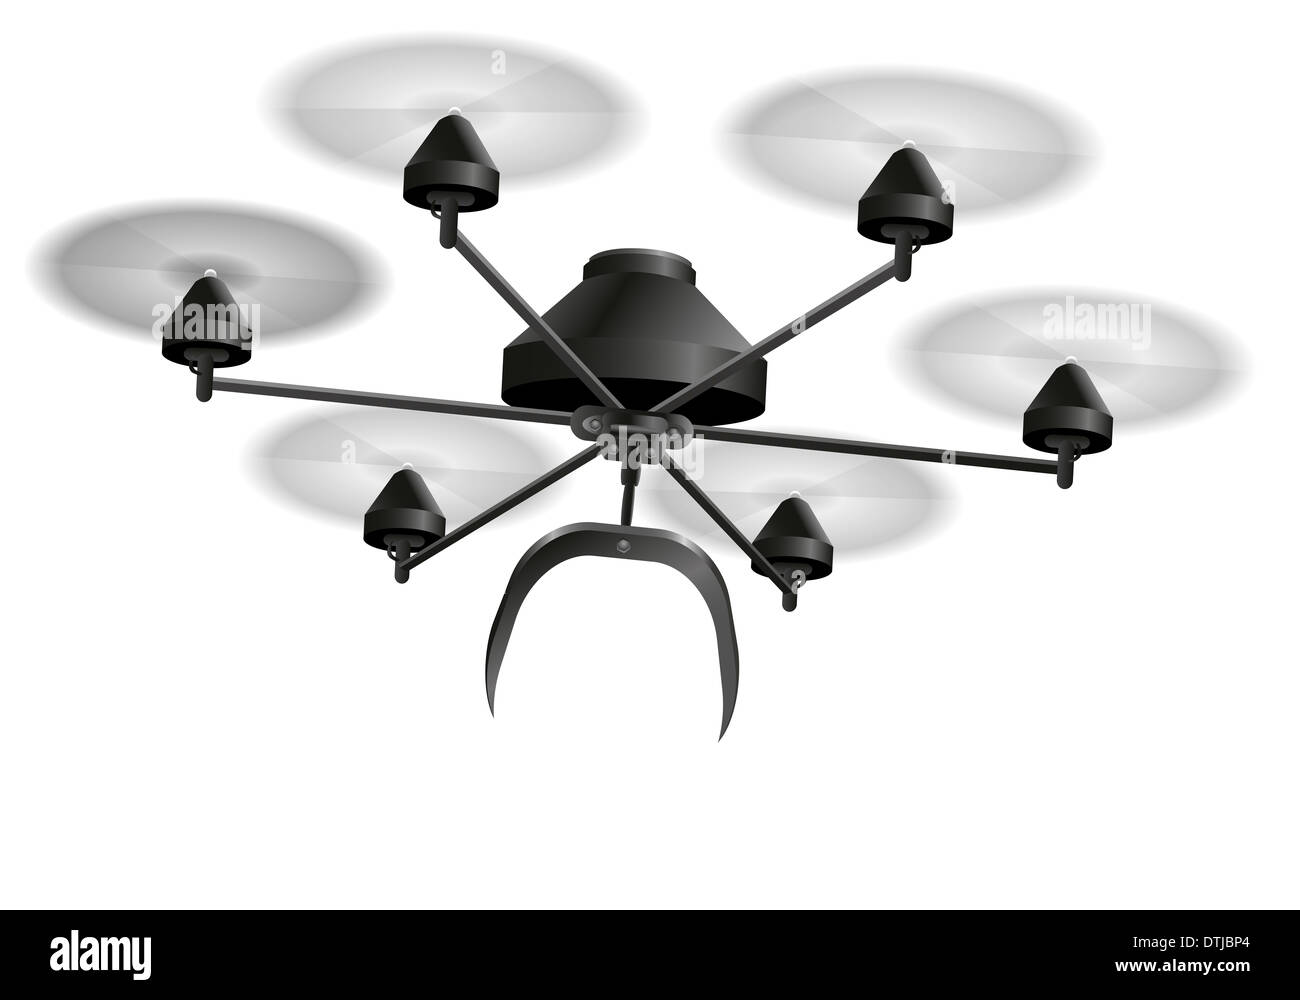 Drone or unmanned aerial vehicle (UAV) - place any item between the grippers. Stock Photo